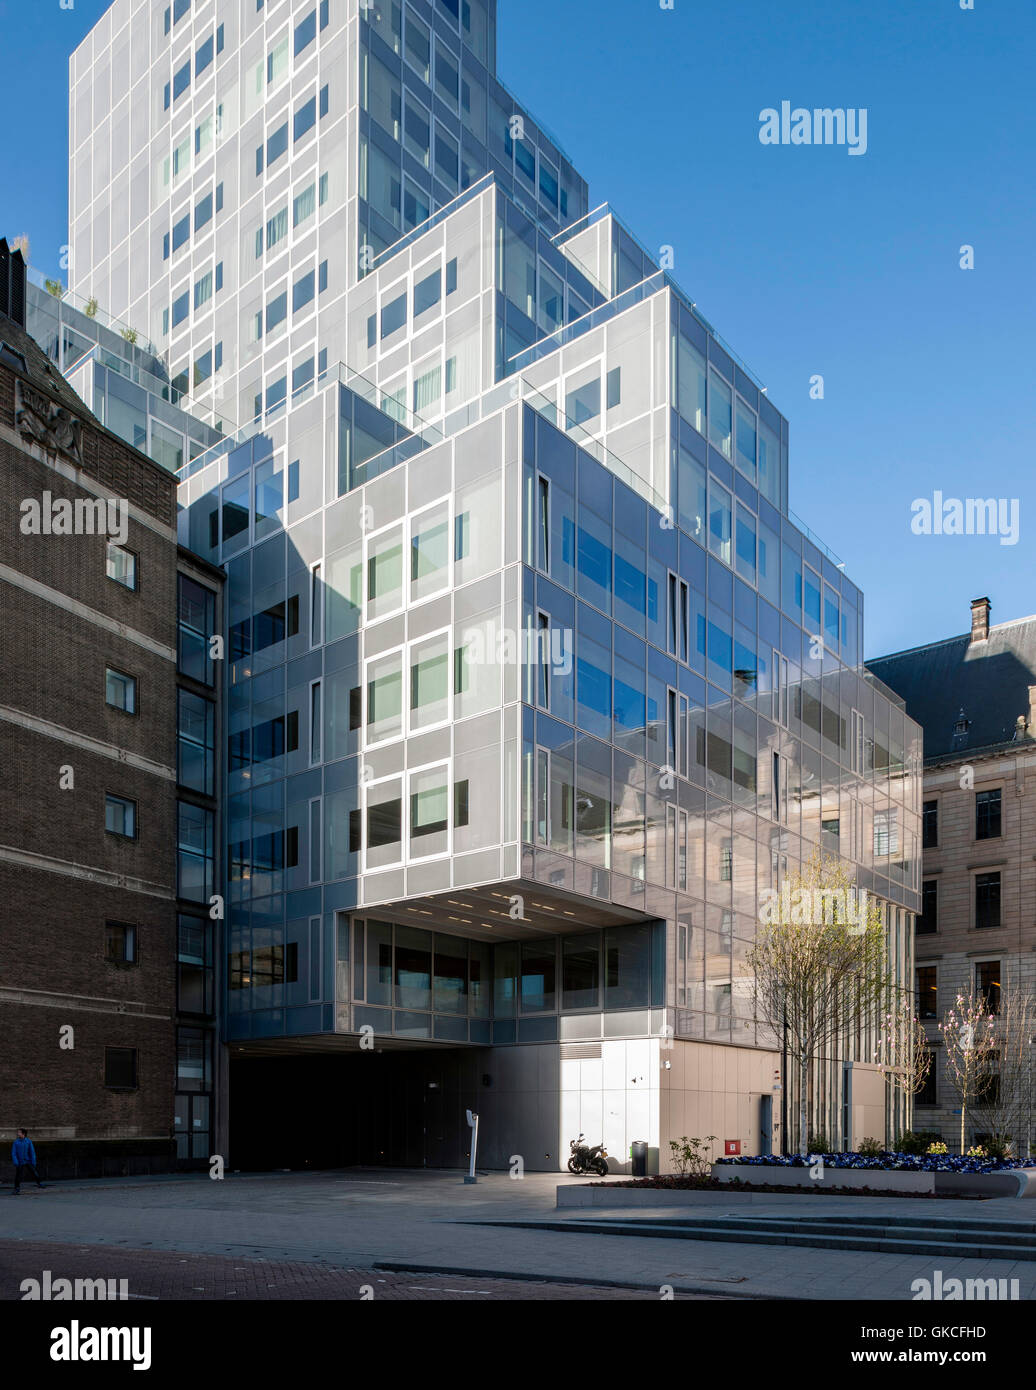 Exterior morning view of rear of building  reflecting old City Council. Timmerhuis, Rotterdam, Netherlands. Architect: OMA Rem Koolhaas, 2015. Stock Photo